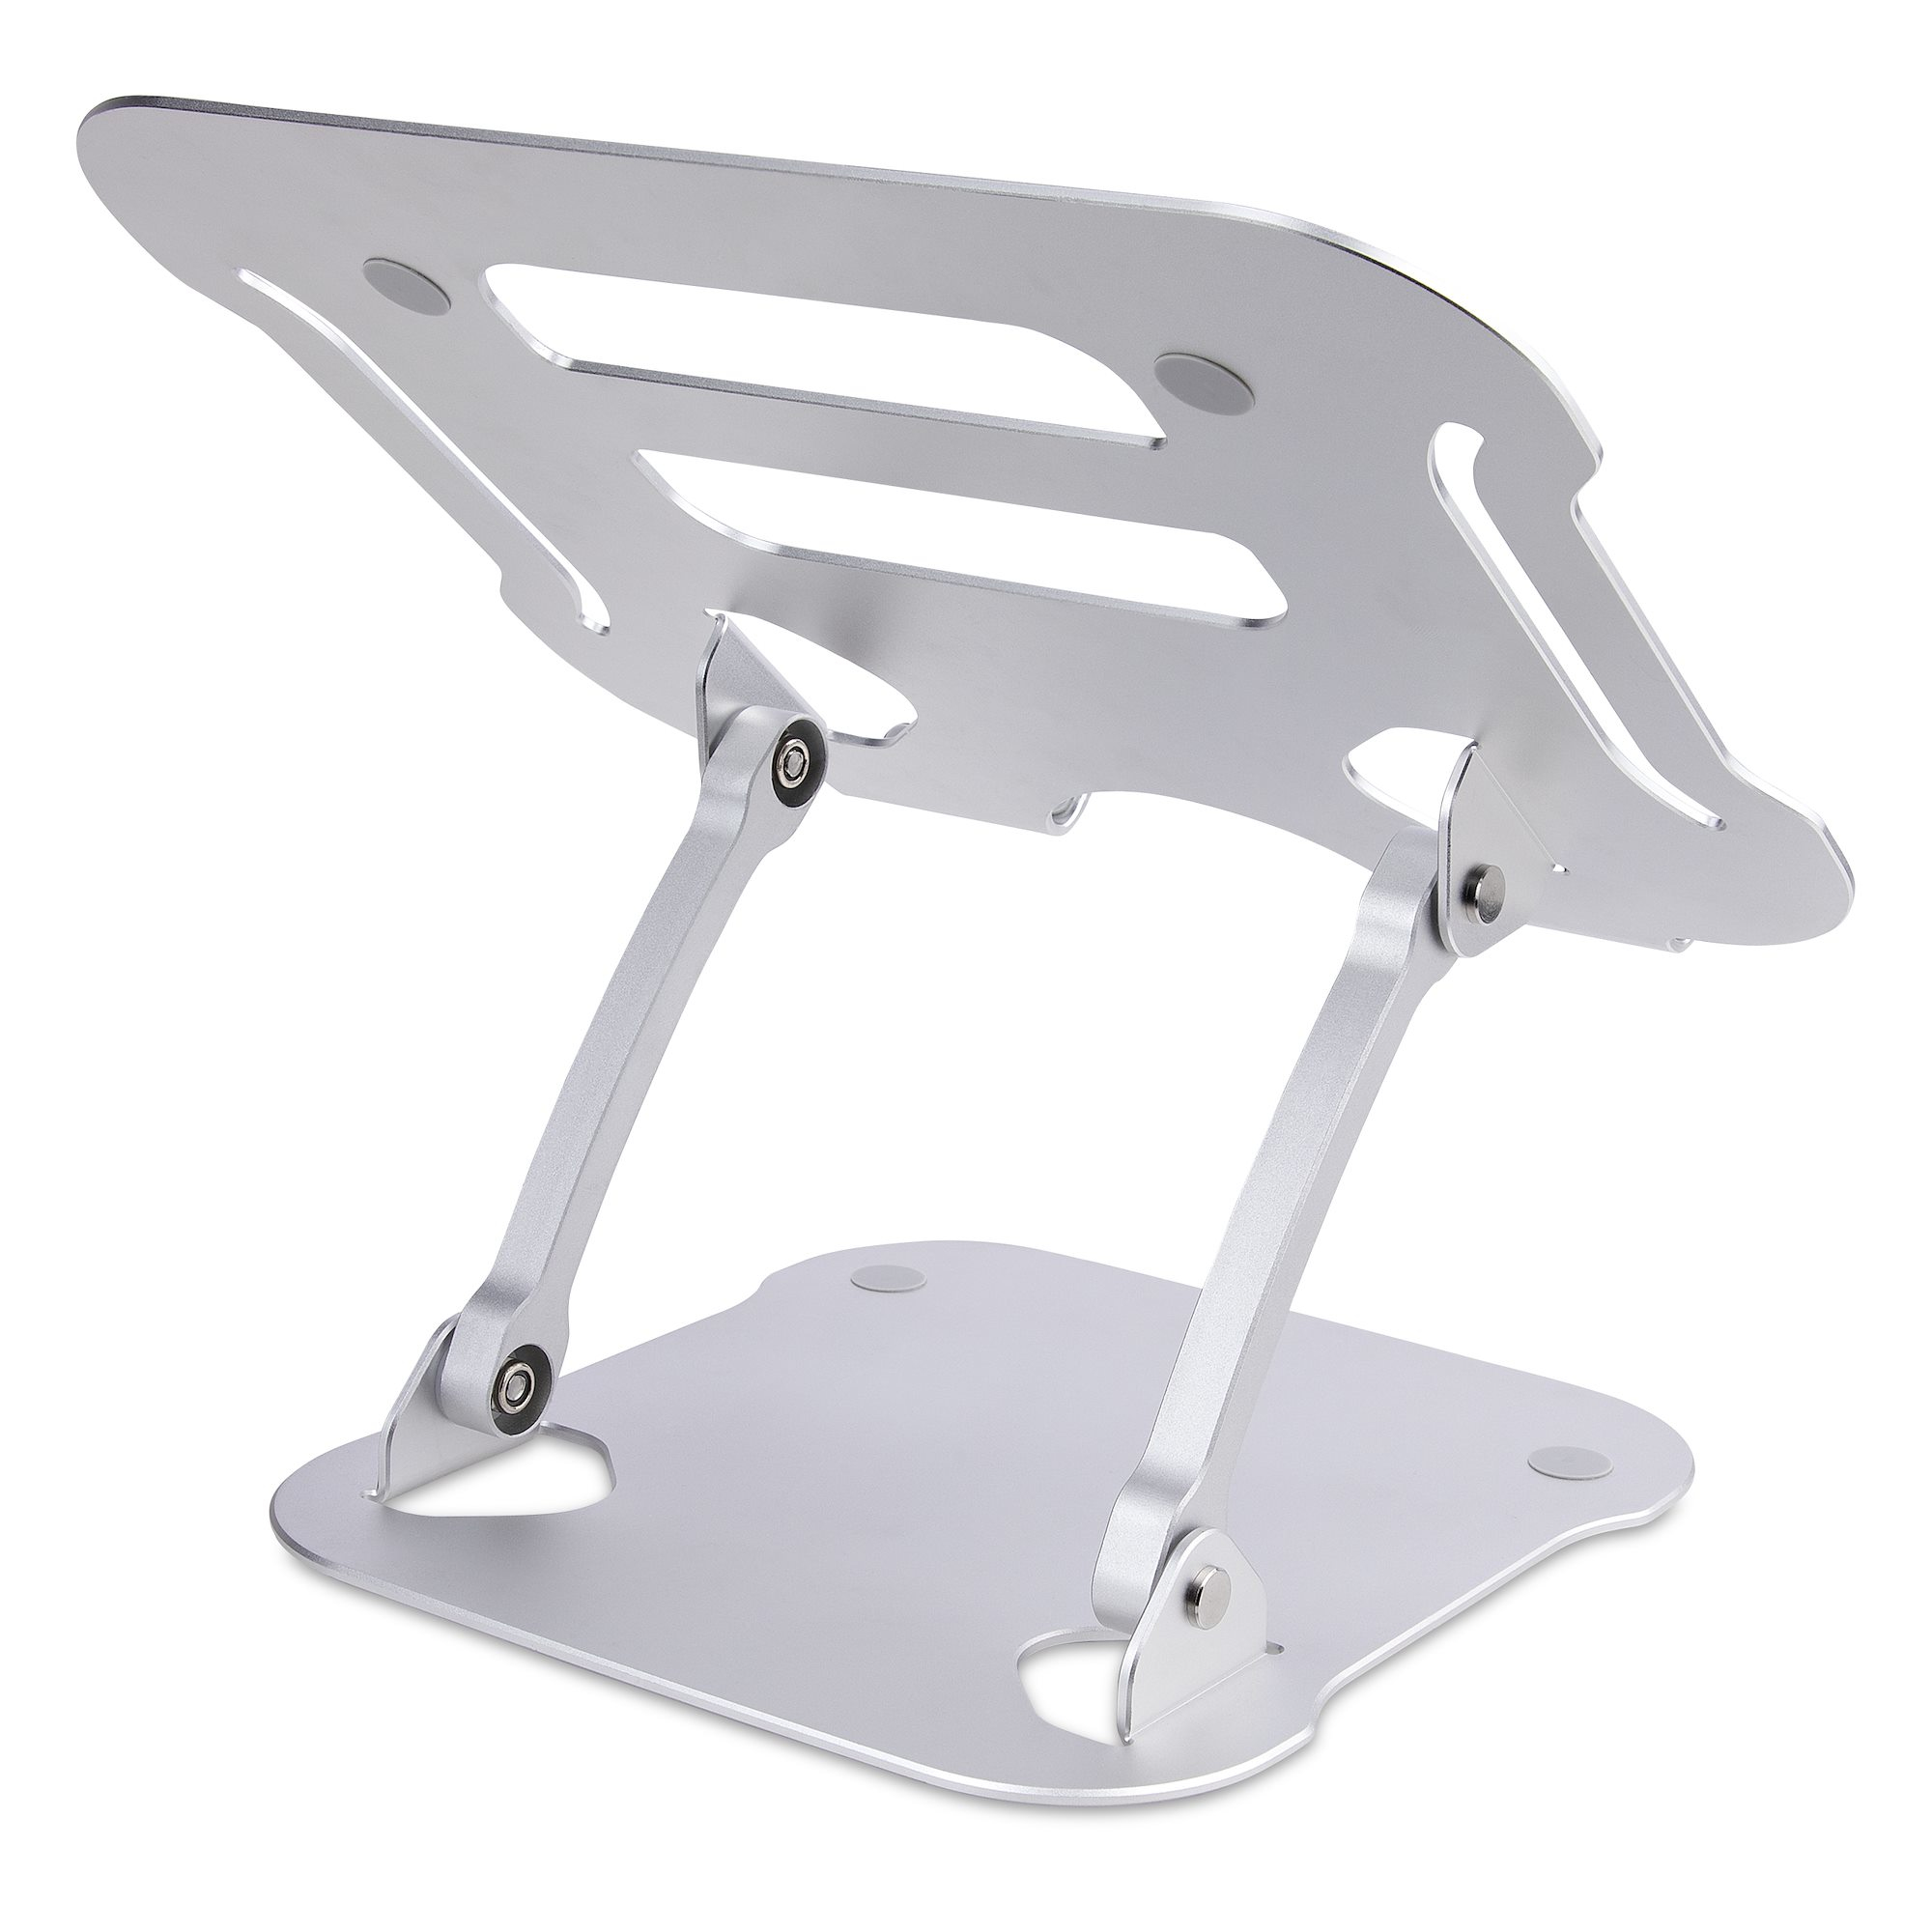 StarTech.com Laptop Stand for Desk, Ergonomic Laptop Stand Adjustable Height, Aluminium, Portable, Supports up to 22lb (10kg), Foldable Laptop Holder for Desk - Angled Notebook Computer Riser/Lift